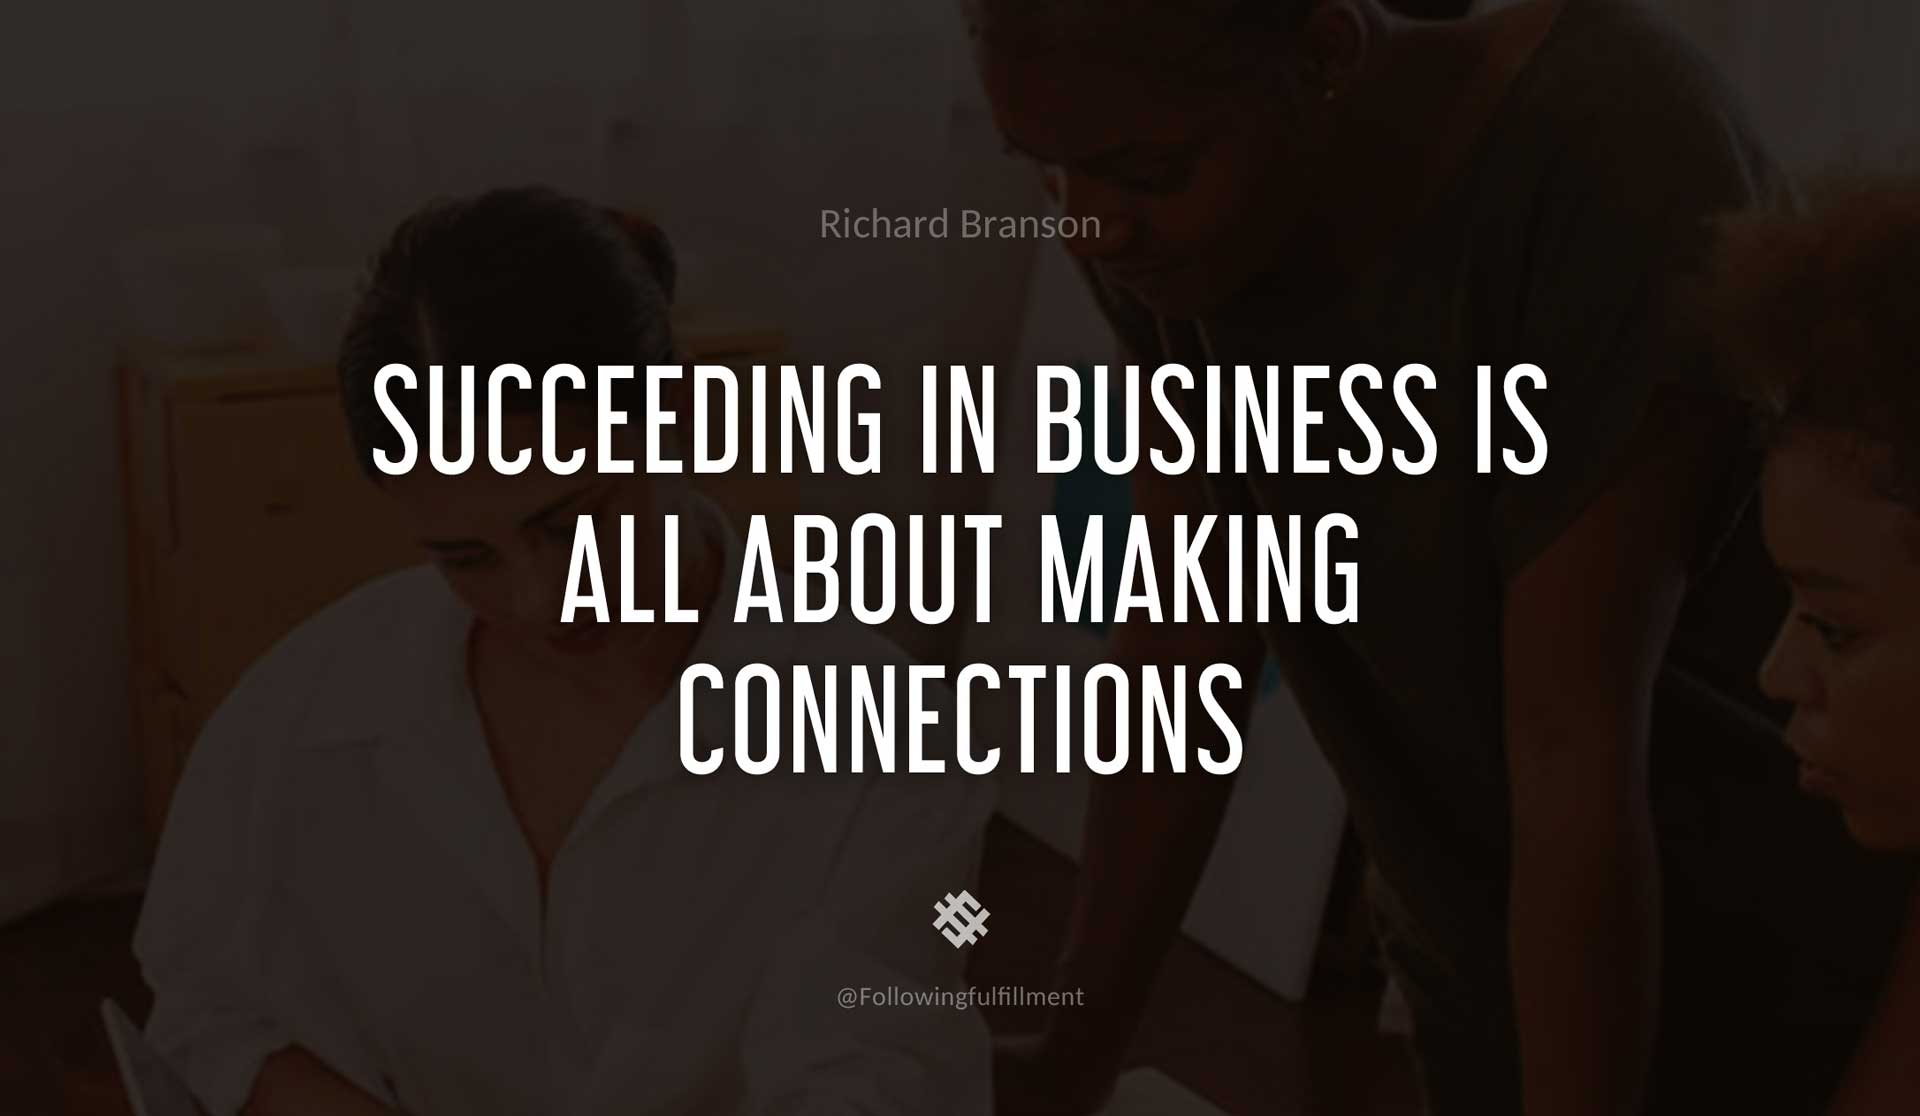 Succeeding-in-business-is-all-about-making-connections-RICHARD-BRANSON-Quote.jpg